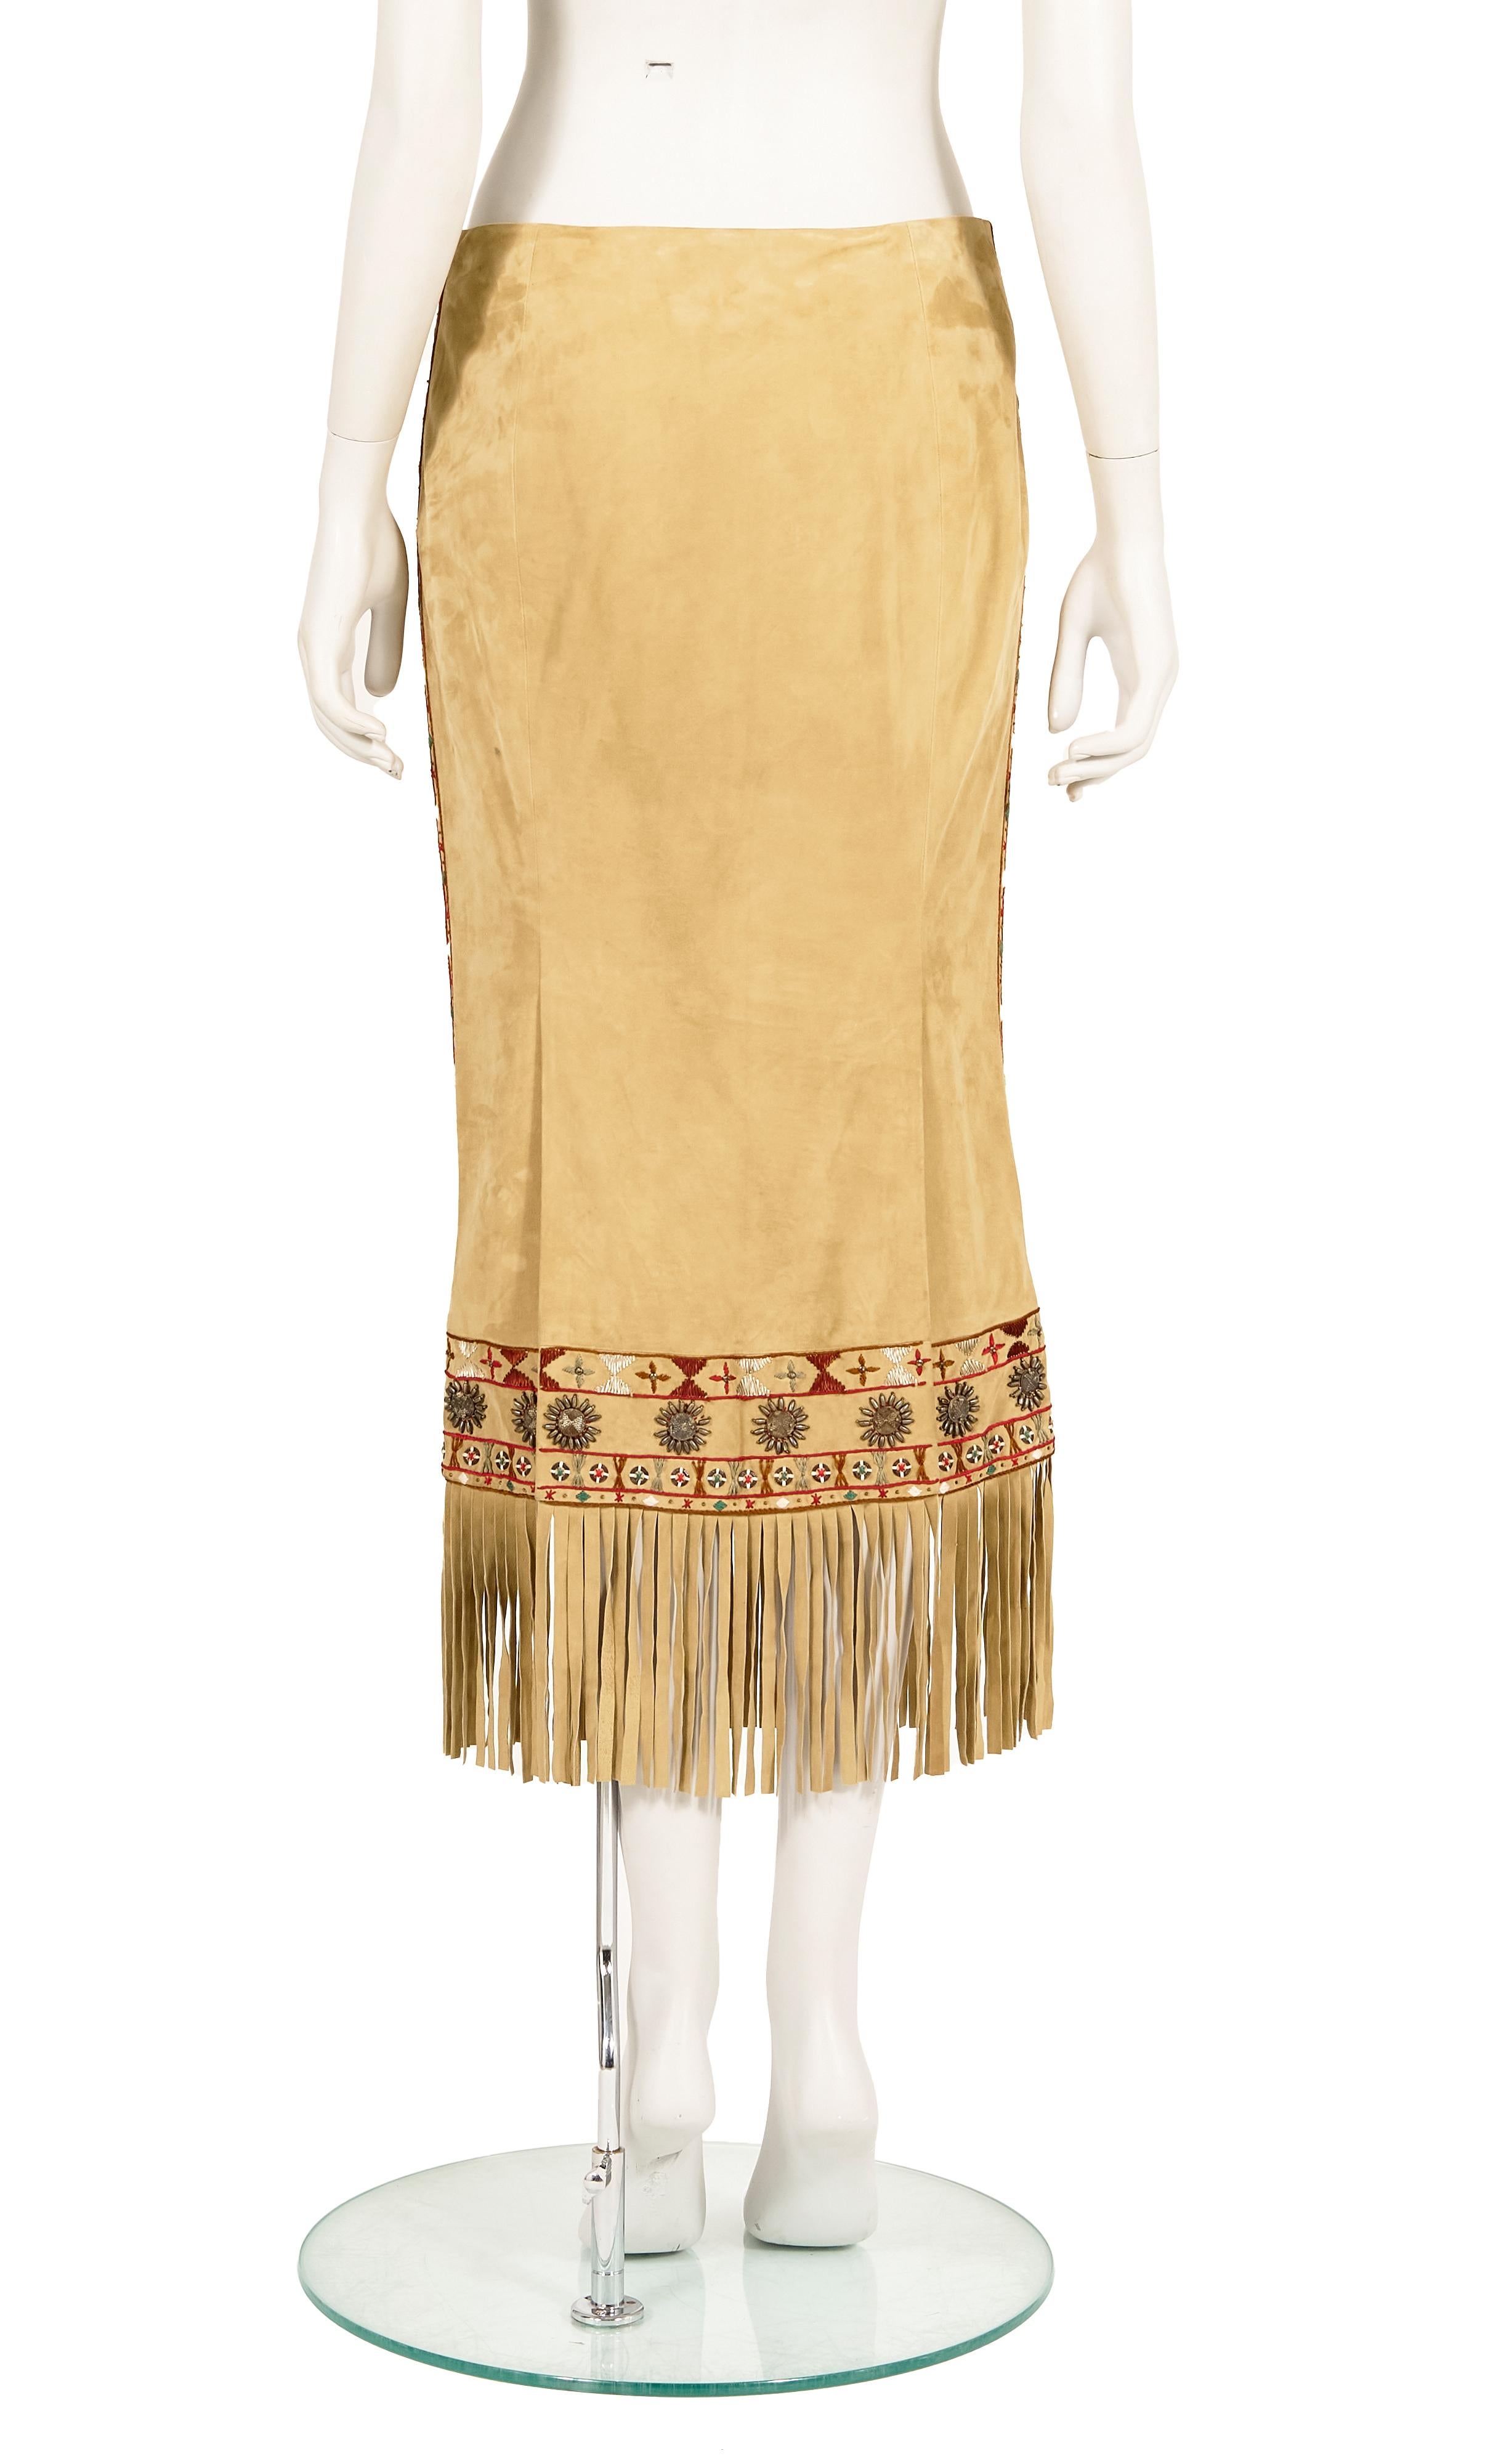 Alexander McQueen F/W 2005 Suede embroidered fringe skirt In Excellent Condition For Sale In Rome, IT